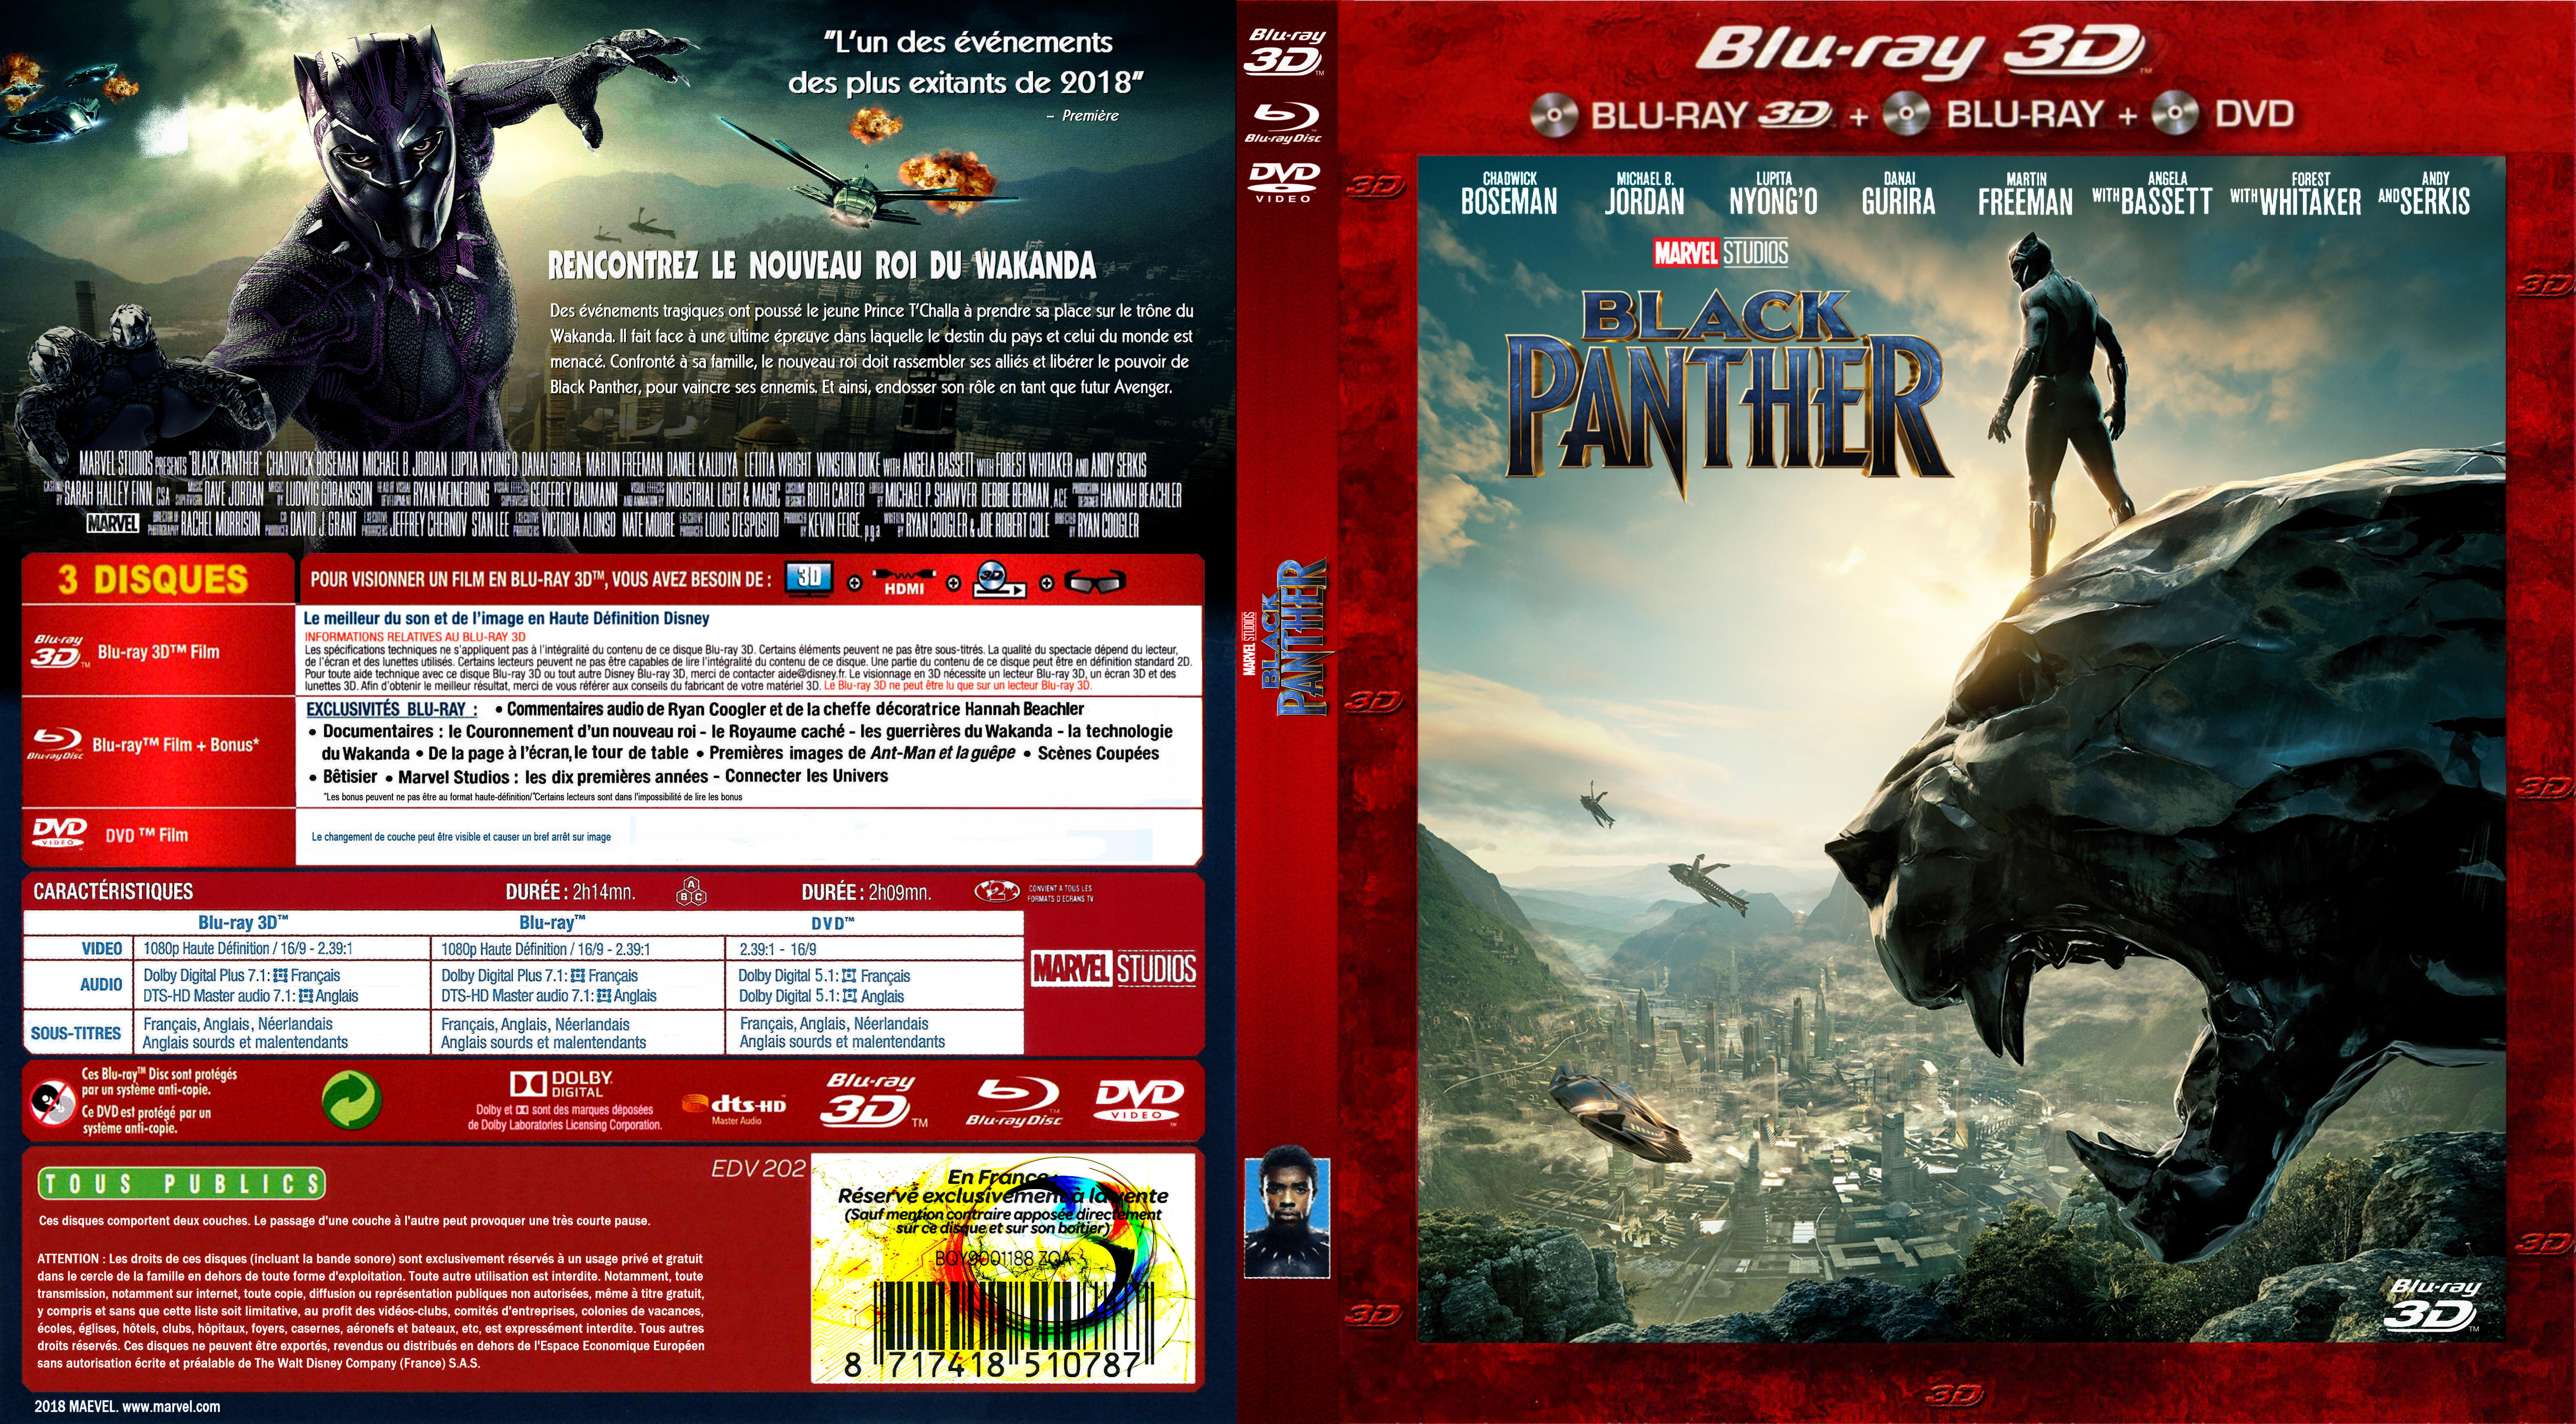 Jaquette DVD Black Panther 3D custom (BLU-RAY)